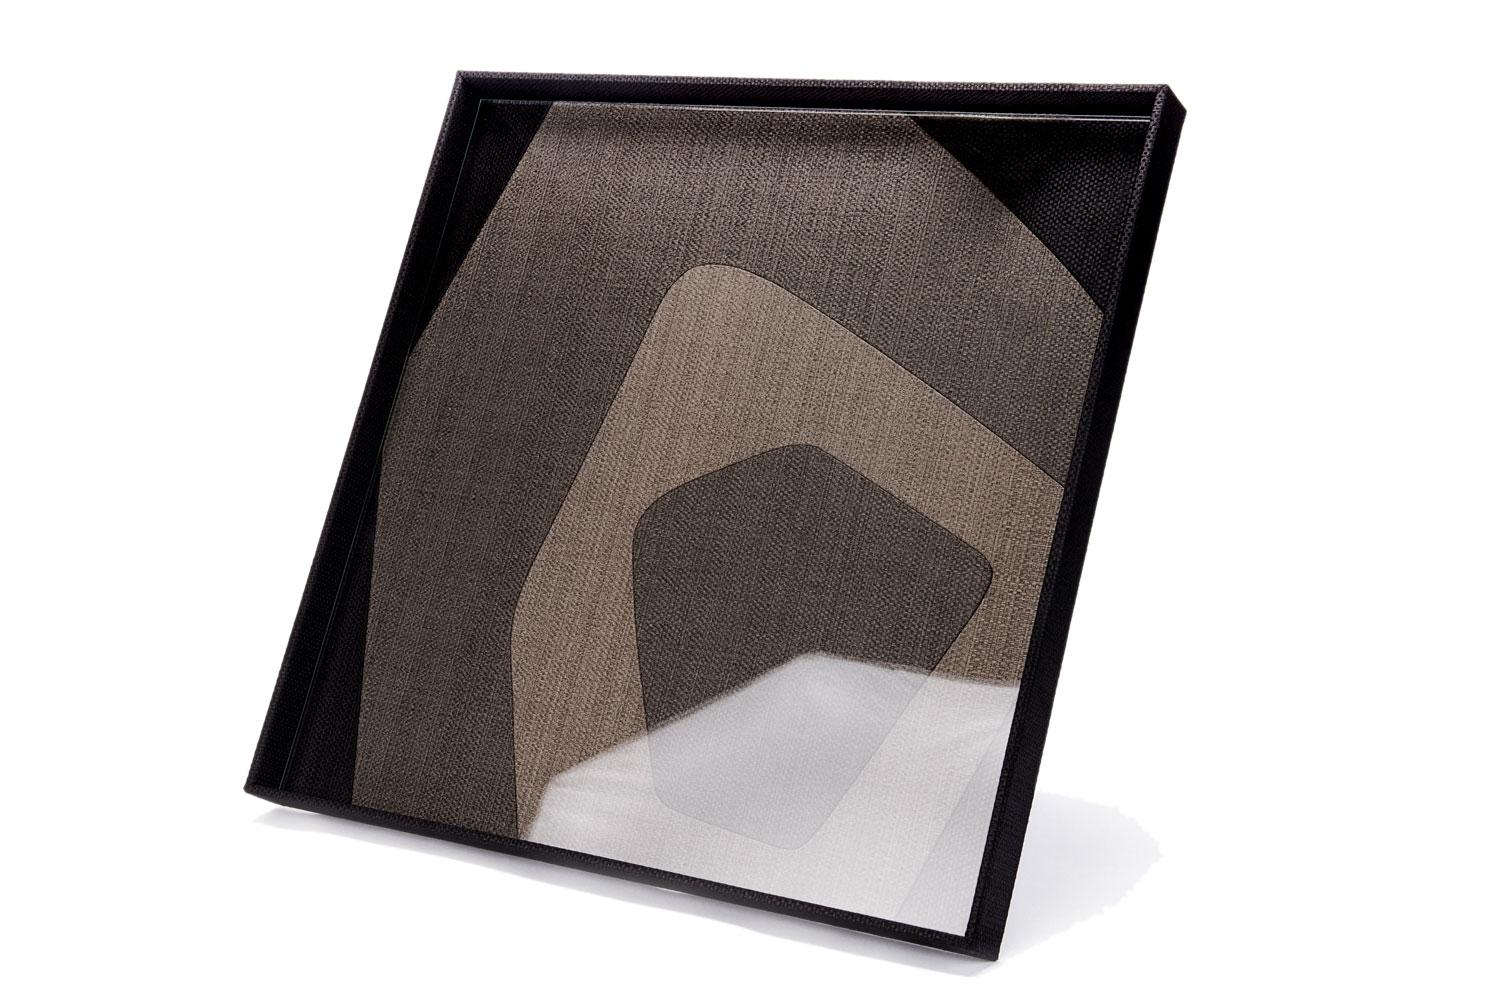 23” square geometric patch tray with glass top by Gilles Caffier

Tray patched of geometric pattern is made from cotton, polyester and has removable glass.

Renowned for his unique & limited edition pieces, Gilles Caffier creates topical